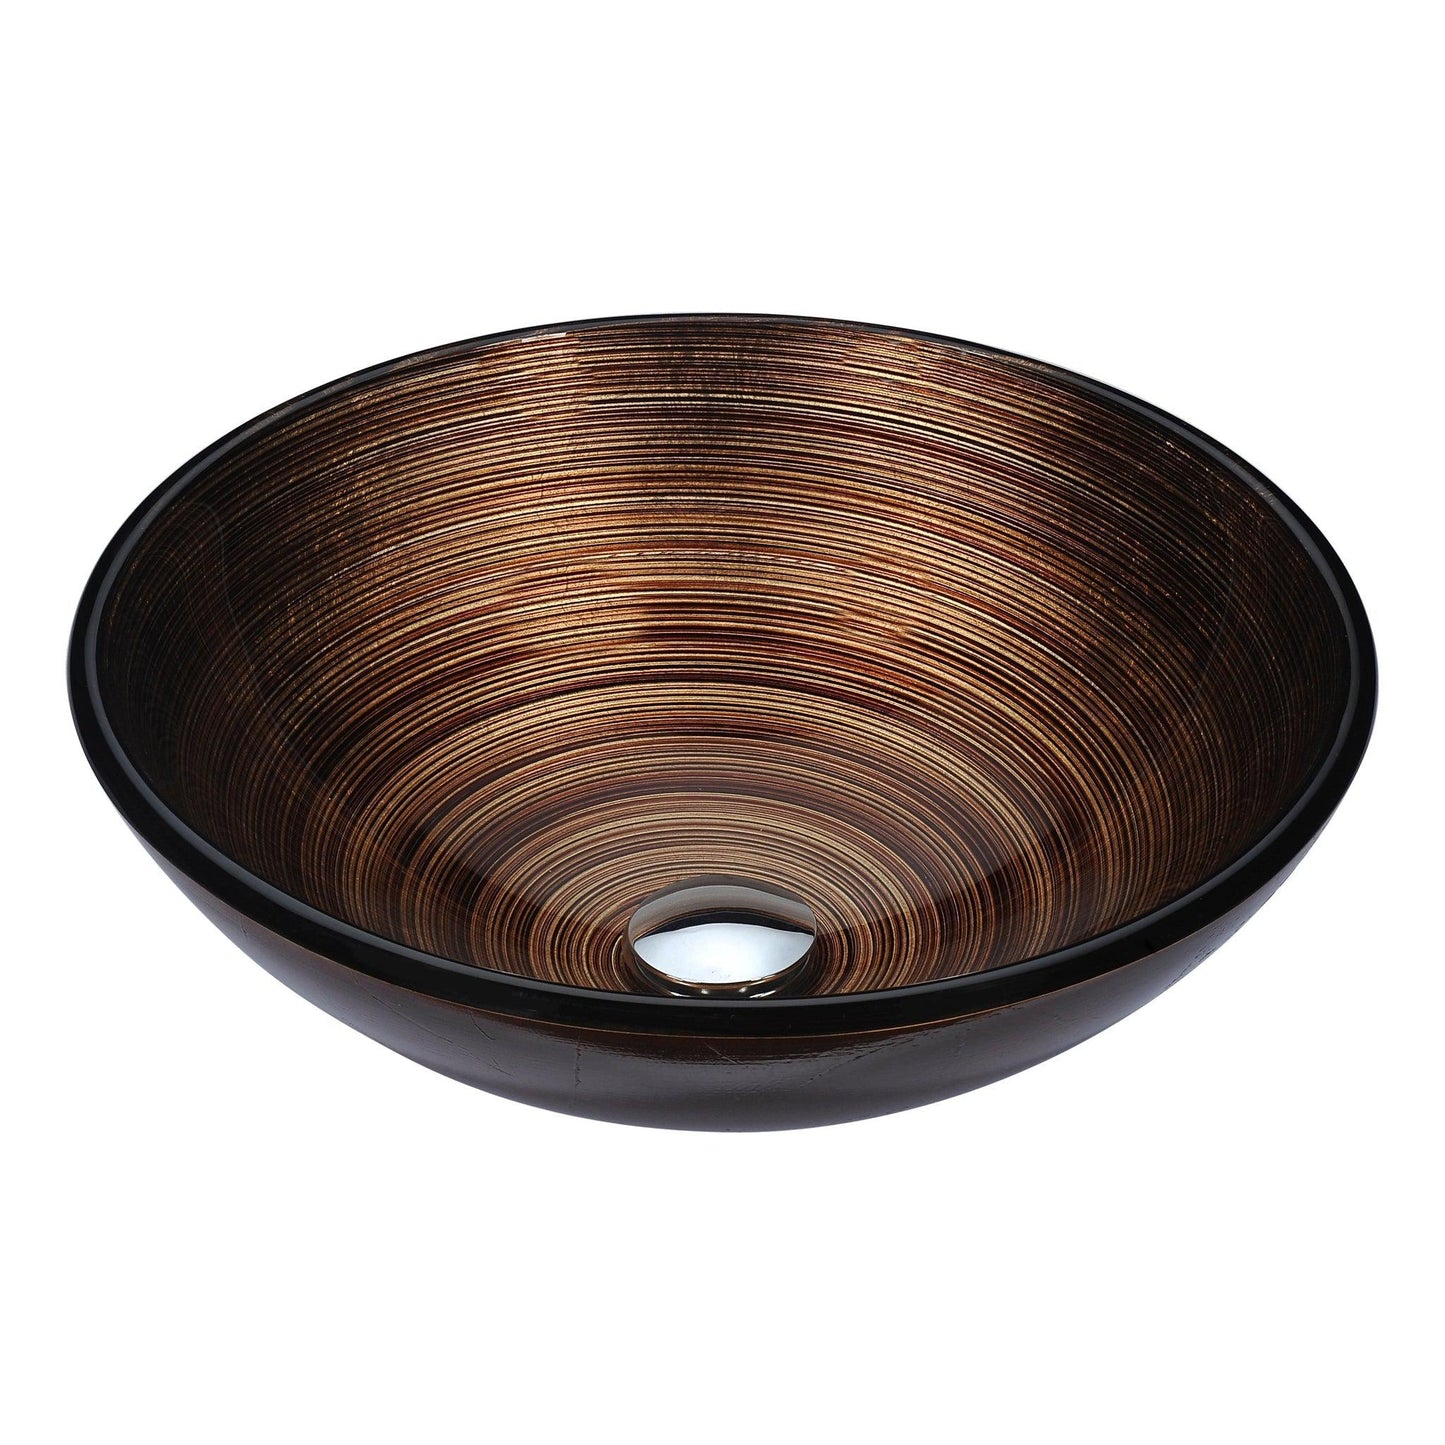 ANZZI Posh Series 17" x 17" Round Radial Umber Deco-Glass Vessel Sink With Polished Chrome Pop-Up Drain